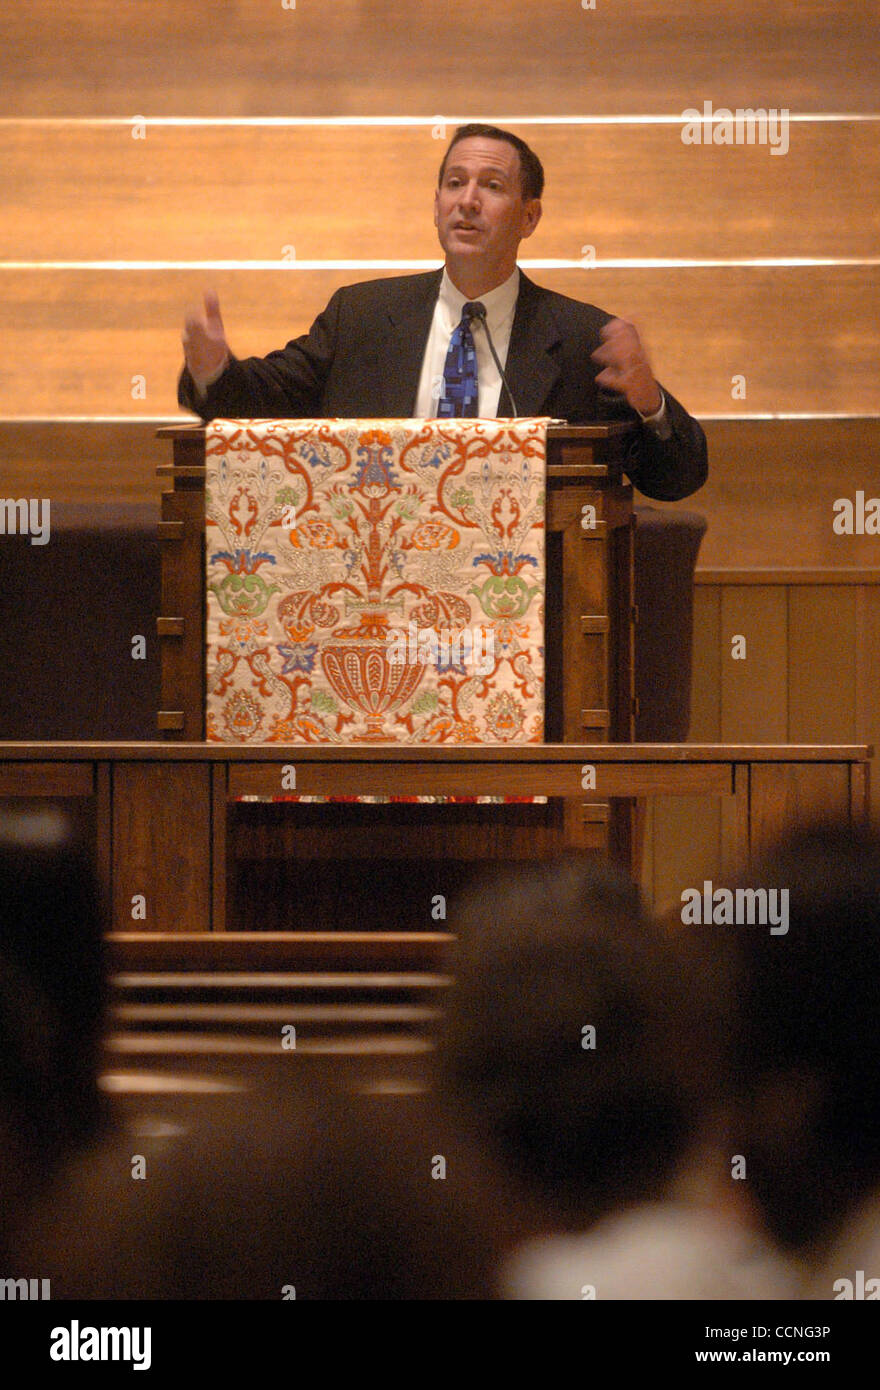 METRO - Mitchell Katine, a Houston attorney, speaks about 'The Downfall of Sodomy and the Future of Gay America' at Trinity University on Thursday, Oct. 7, 2004. Katine represented John Lawrence and Tyron Garner in the so-called 'Texas sodomy' case. BILLY CALZADA / STAFF Stock Photo